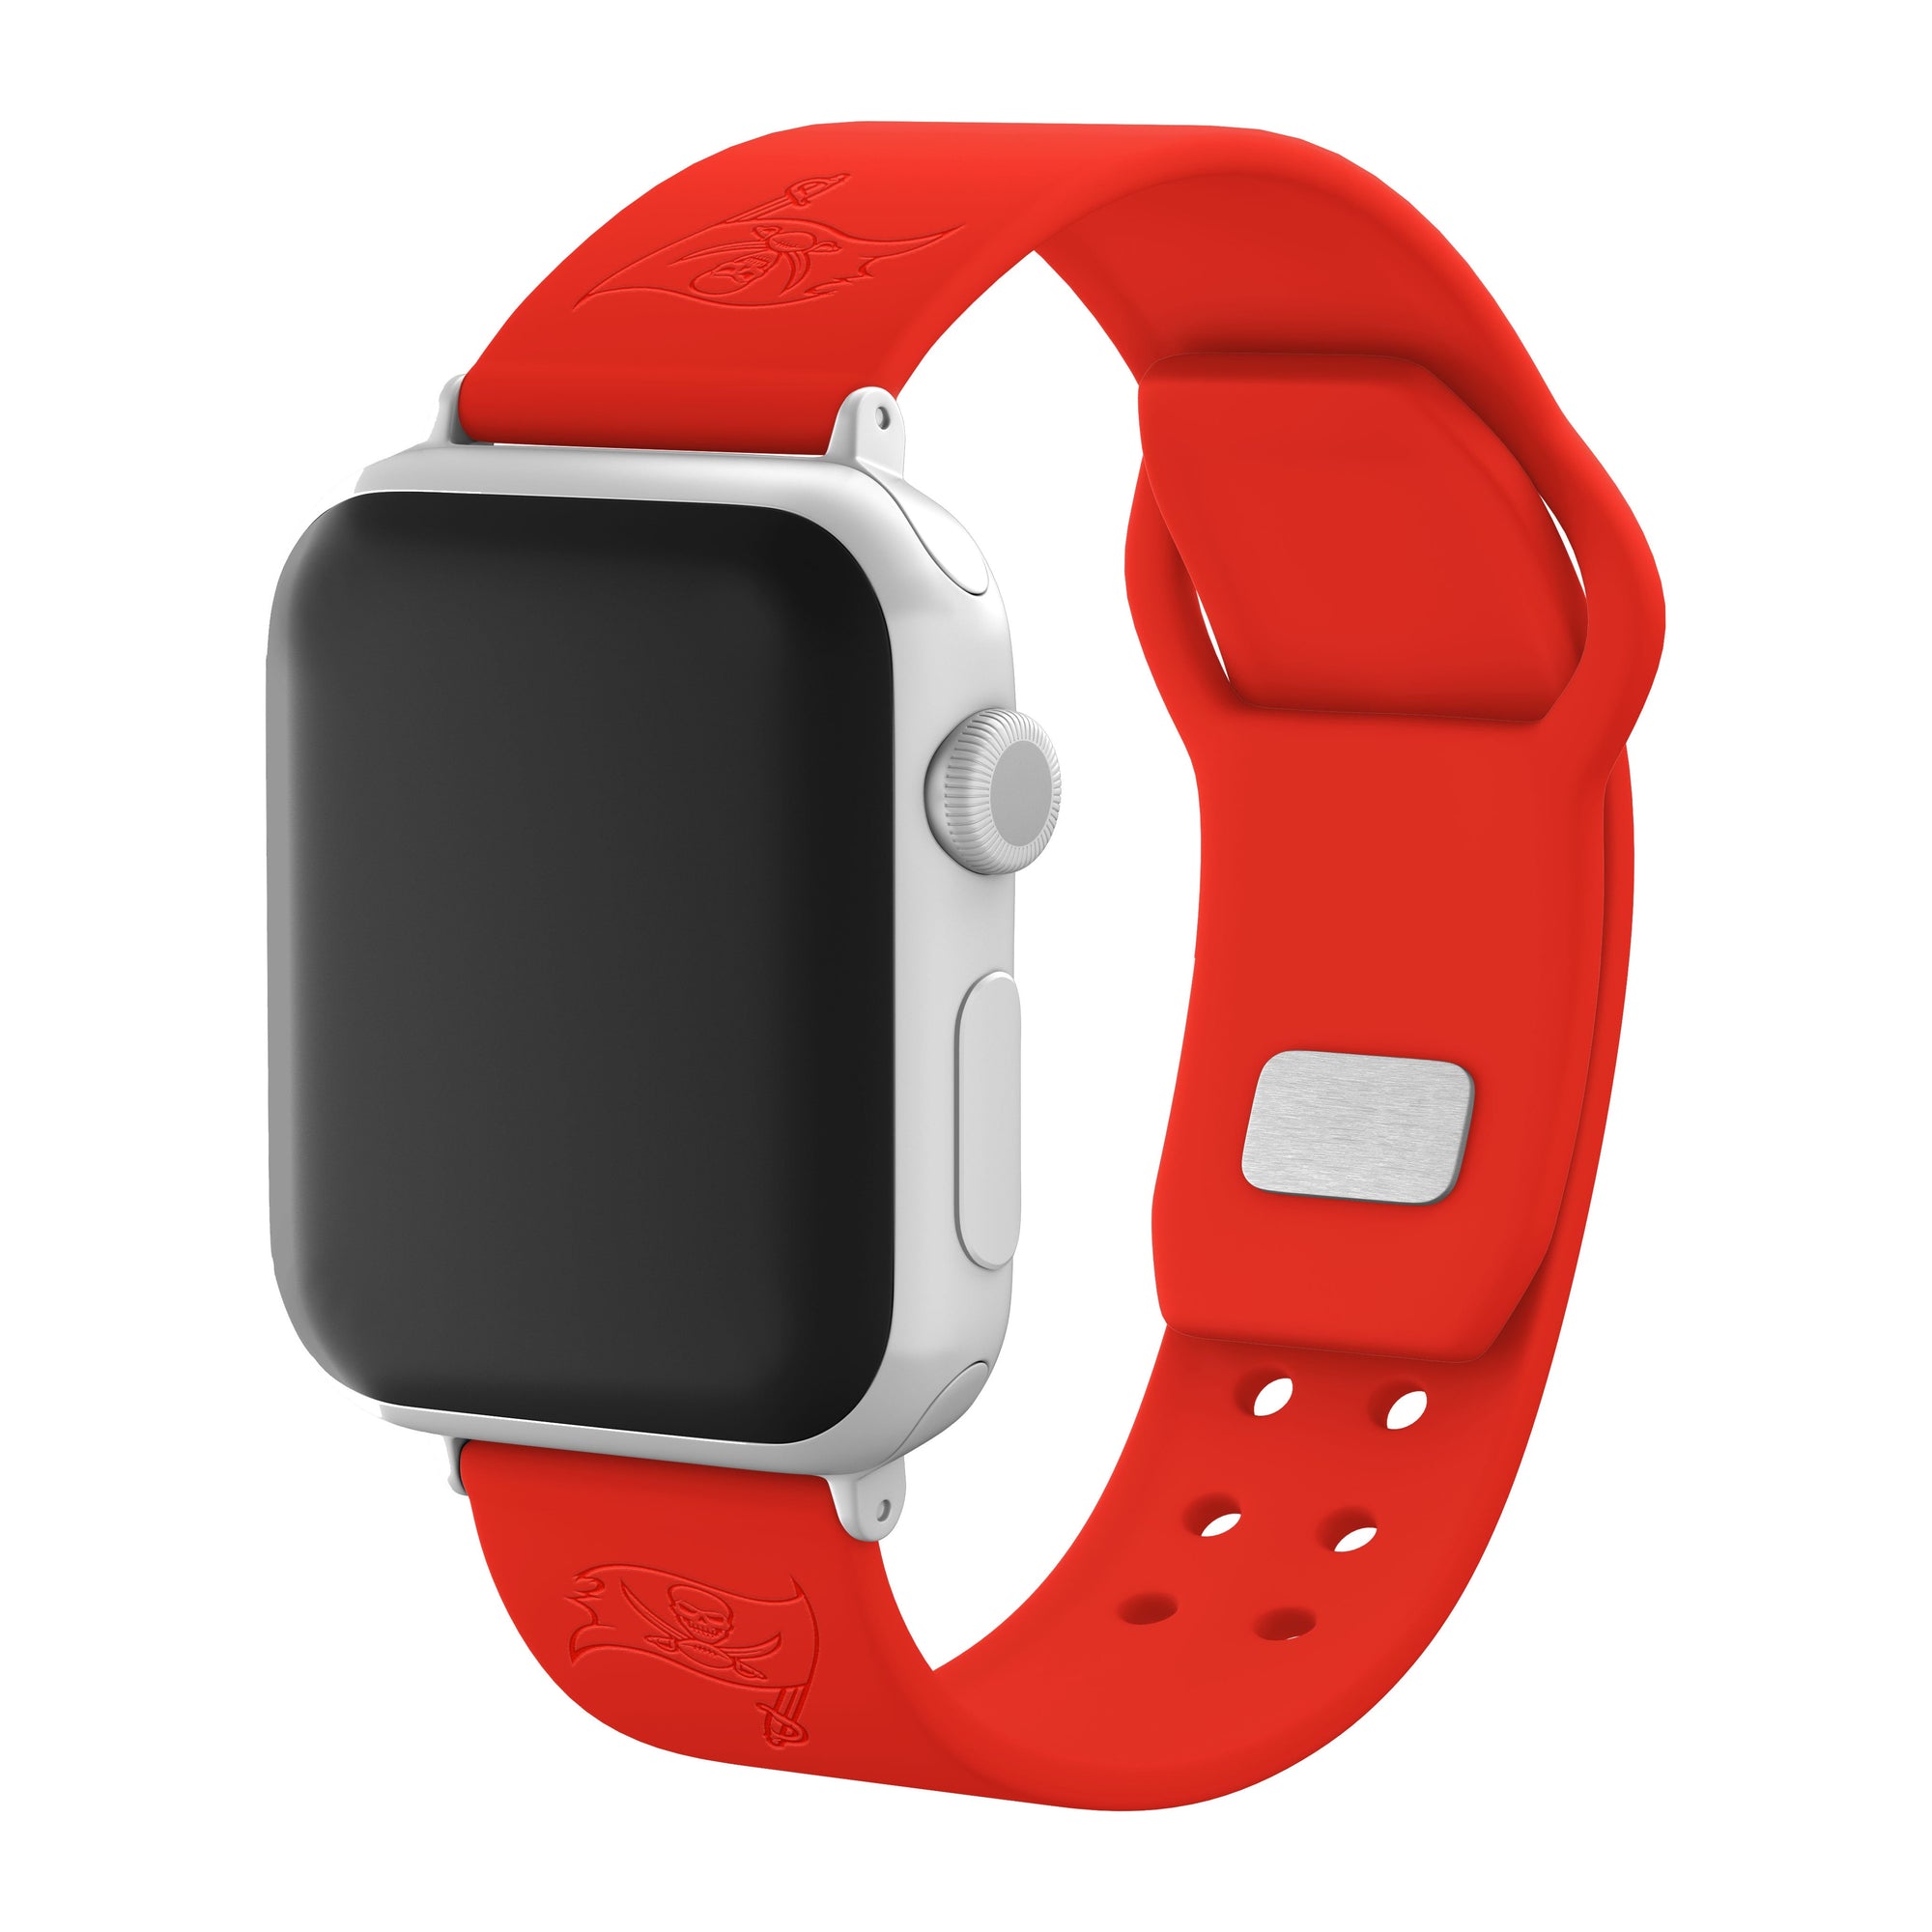 Tampa Bay Buccaneers Engraved Silicone 'Slim' Apple Watch Band